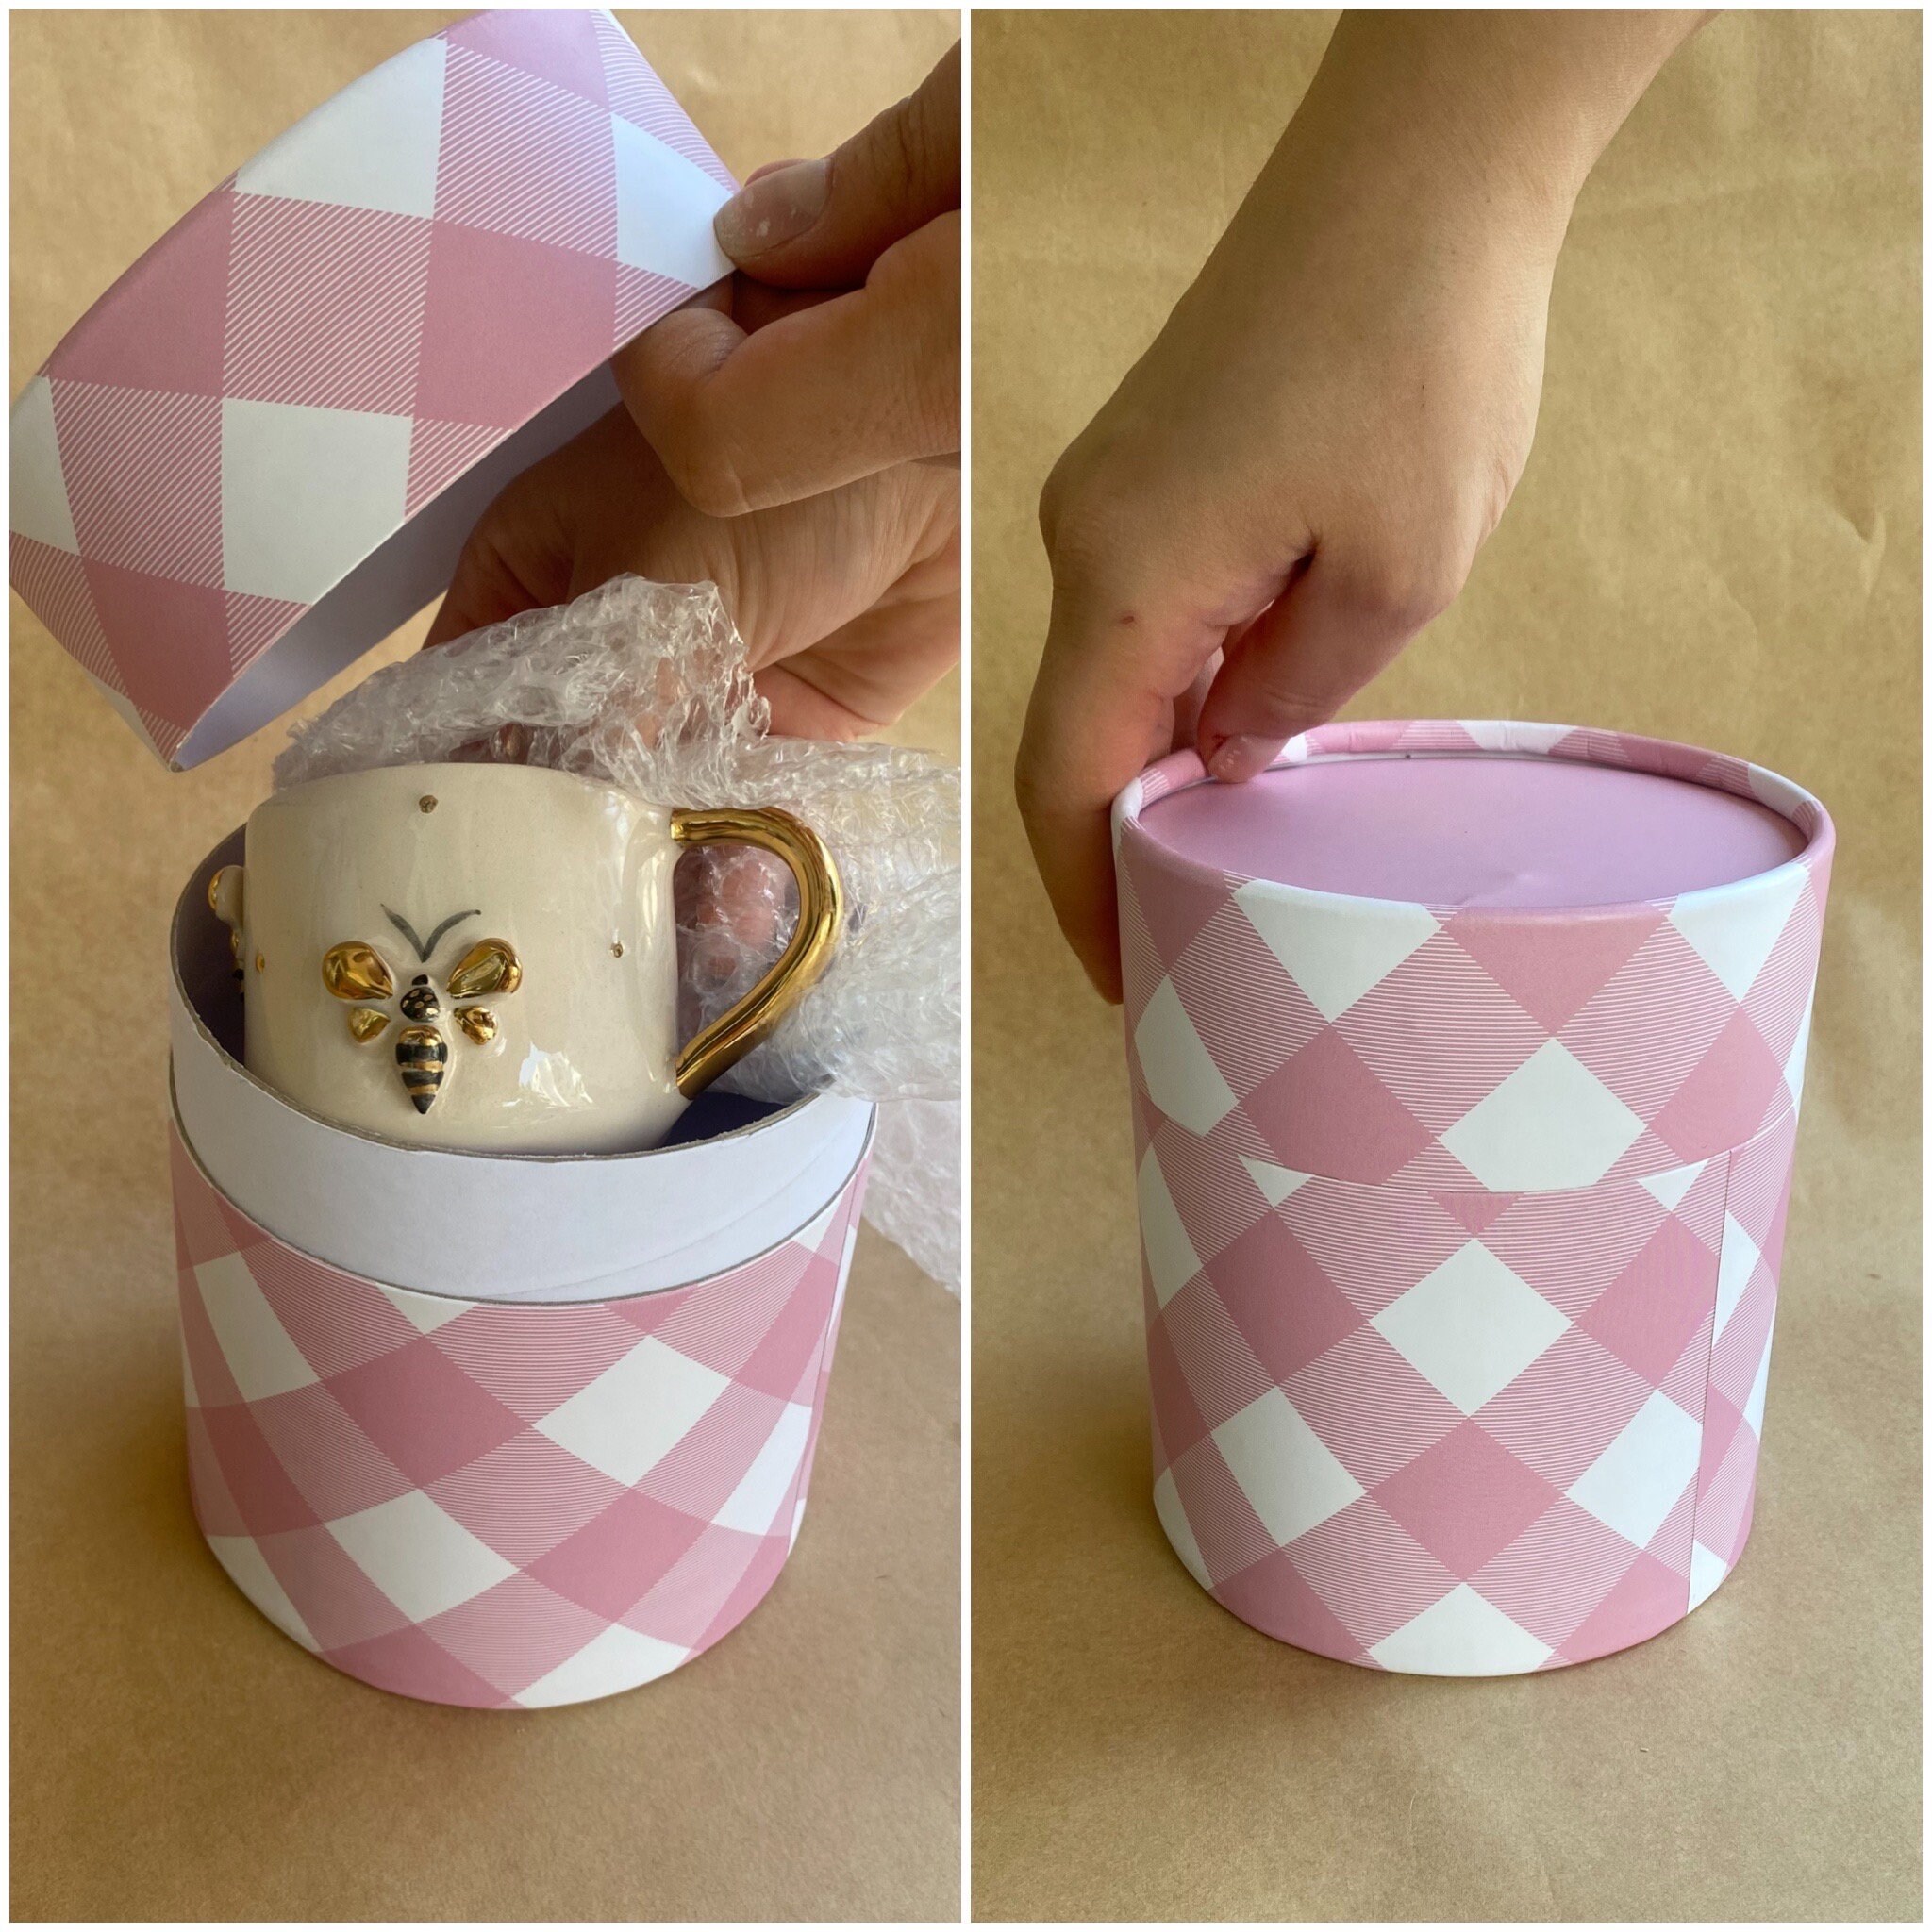 Customizable Handmade Ceramic Cute Unicorn Coffee Cup Personalized Special  Gift for Women Custom Espresso Cup With Saucer Cute Animal 